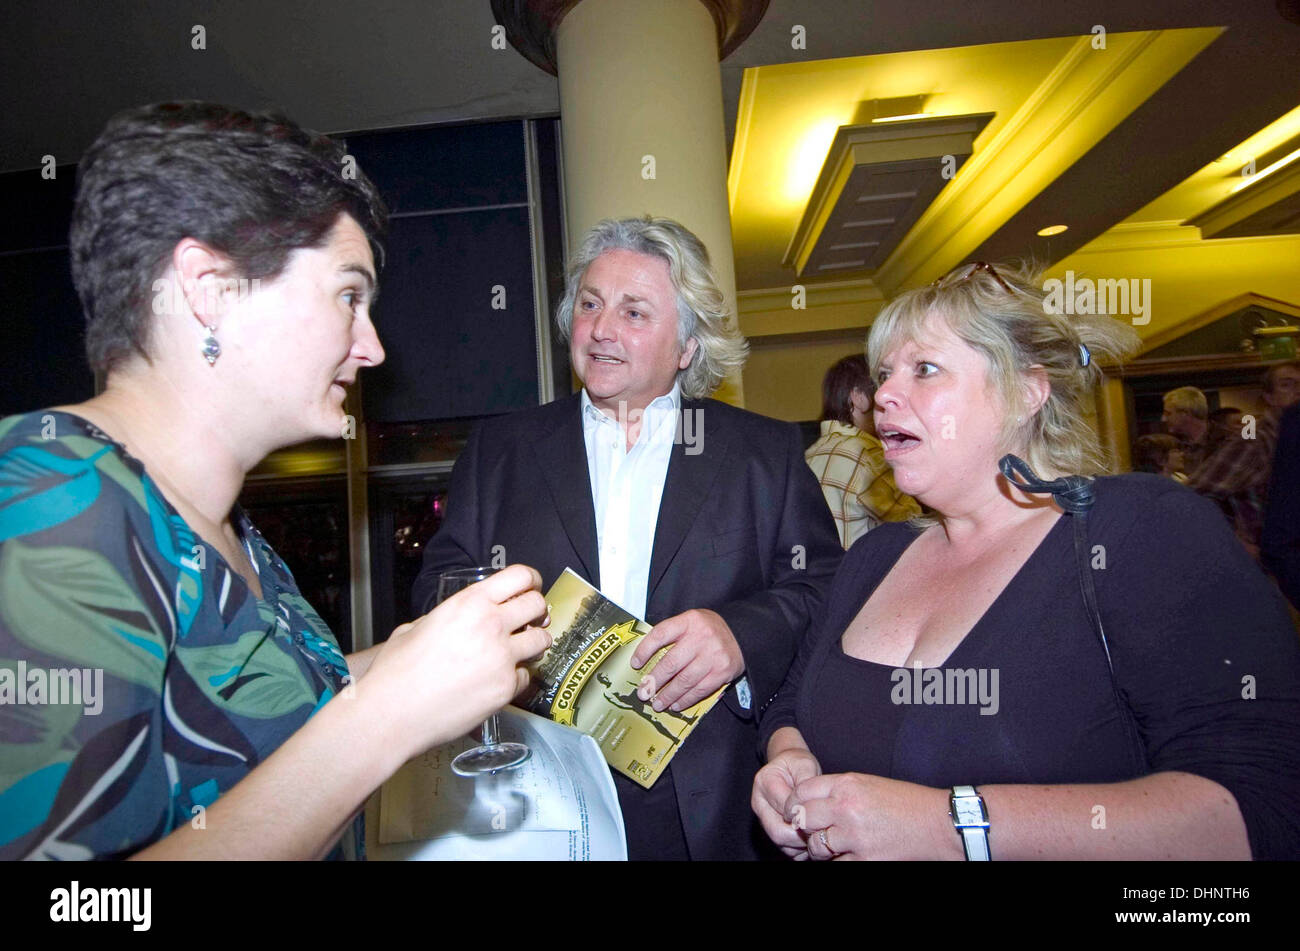 Fashion designer David Emanuel chatting to guests at an aftershow party at the Grand Theatre in Swansea. Stock Photo